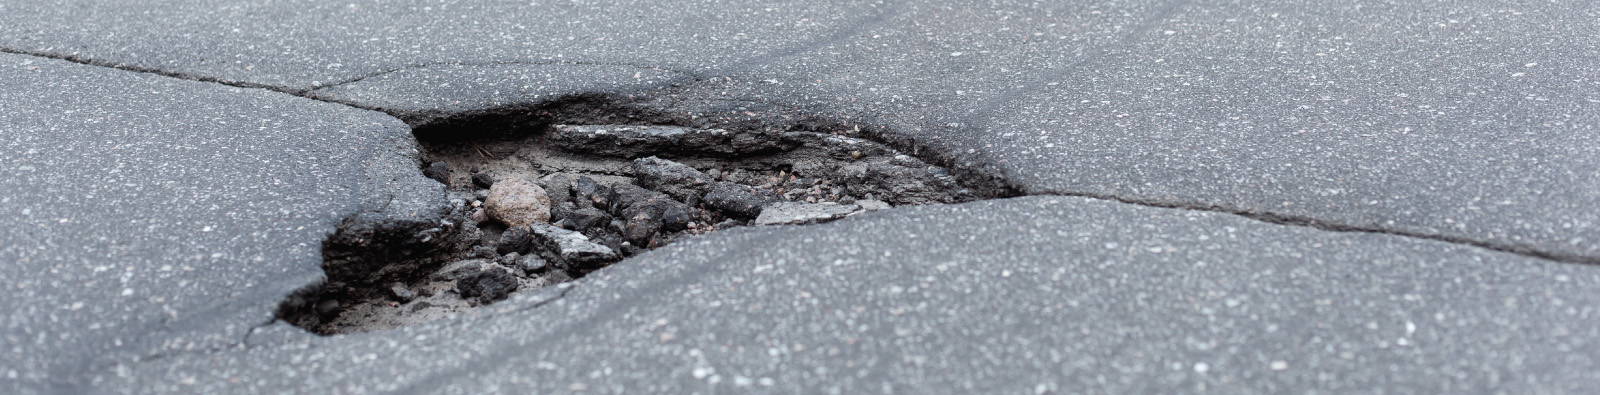 How to protect your car from pothole damage